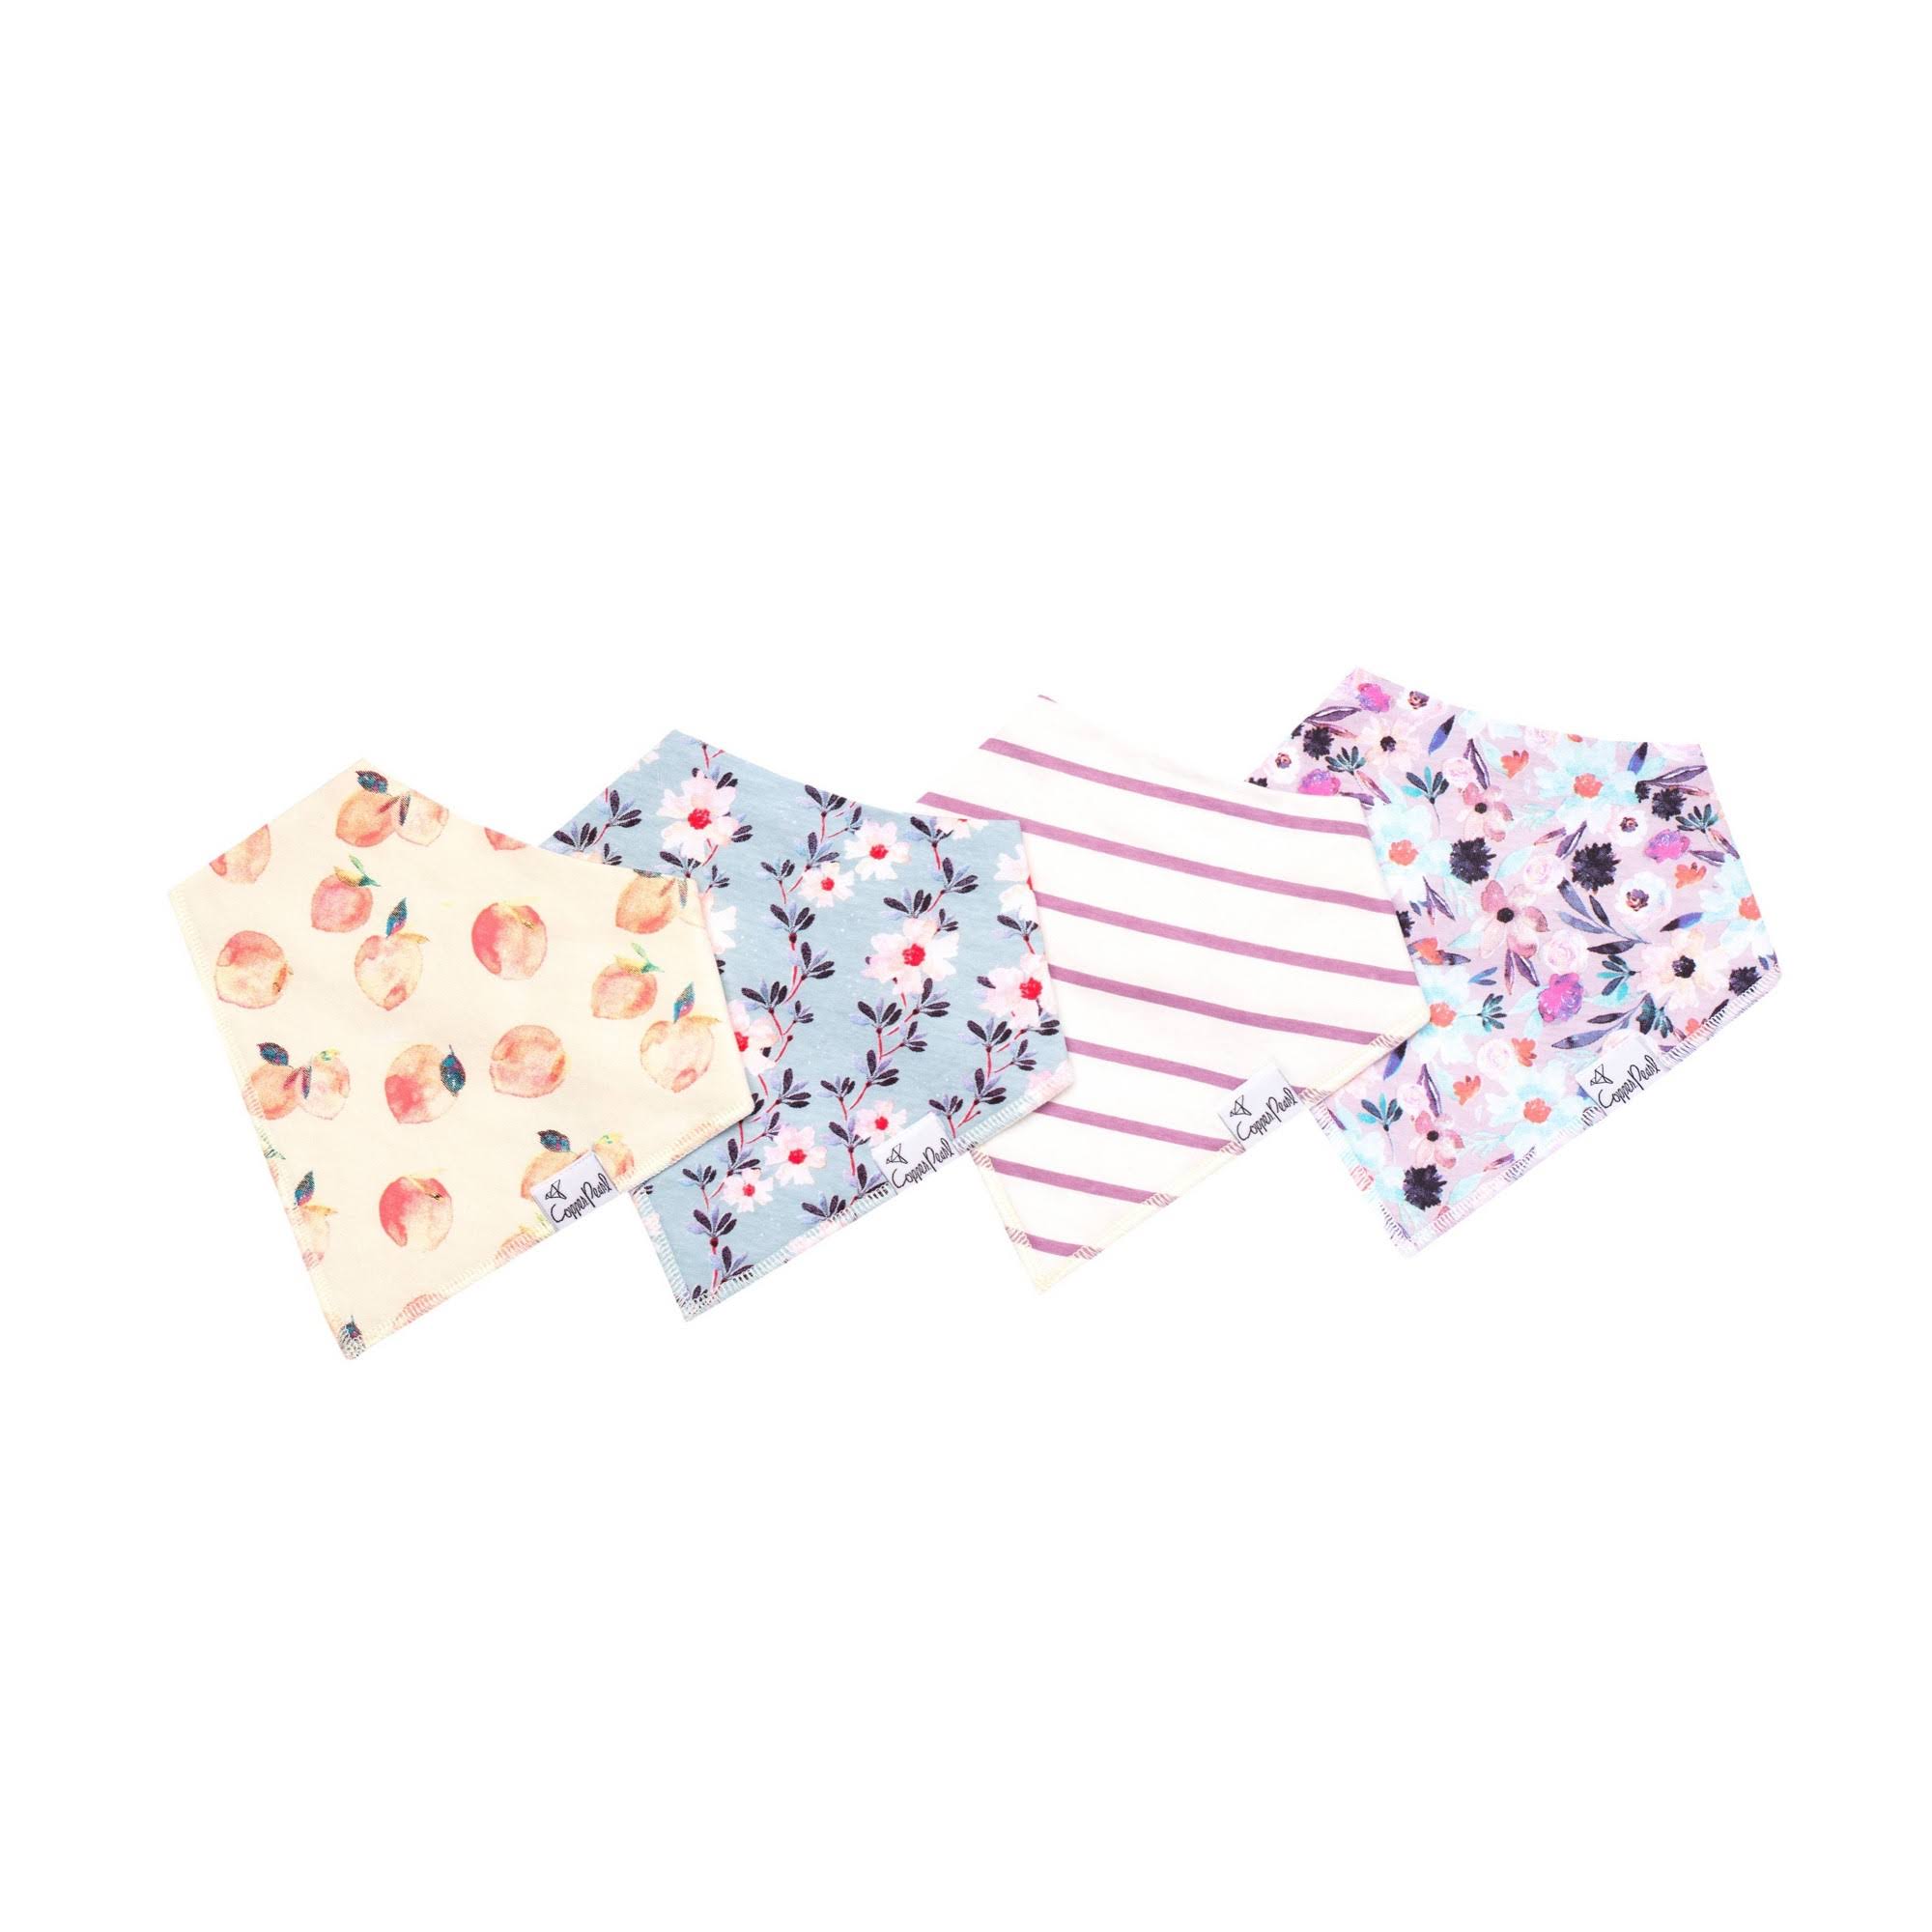 Infant Girl's Copper Pearl 4-Pack Bandana Bibs, Size One Size - Pink